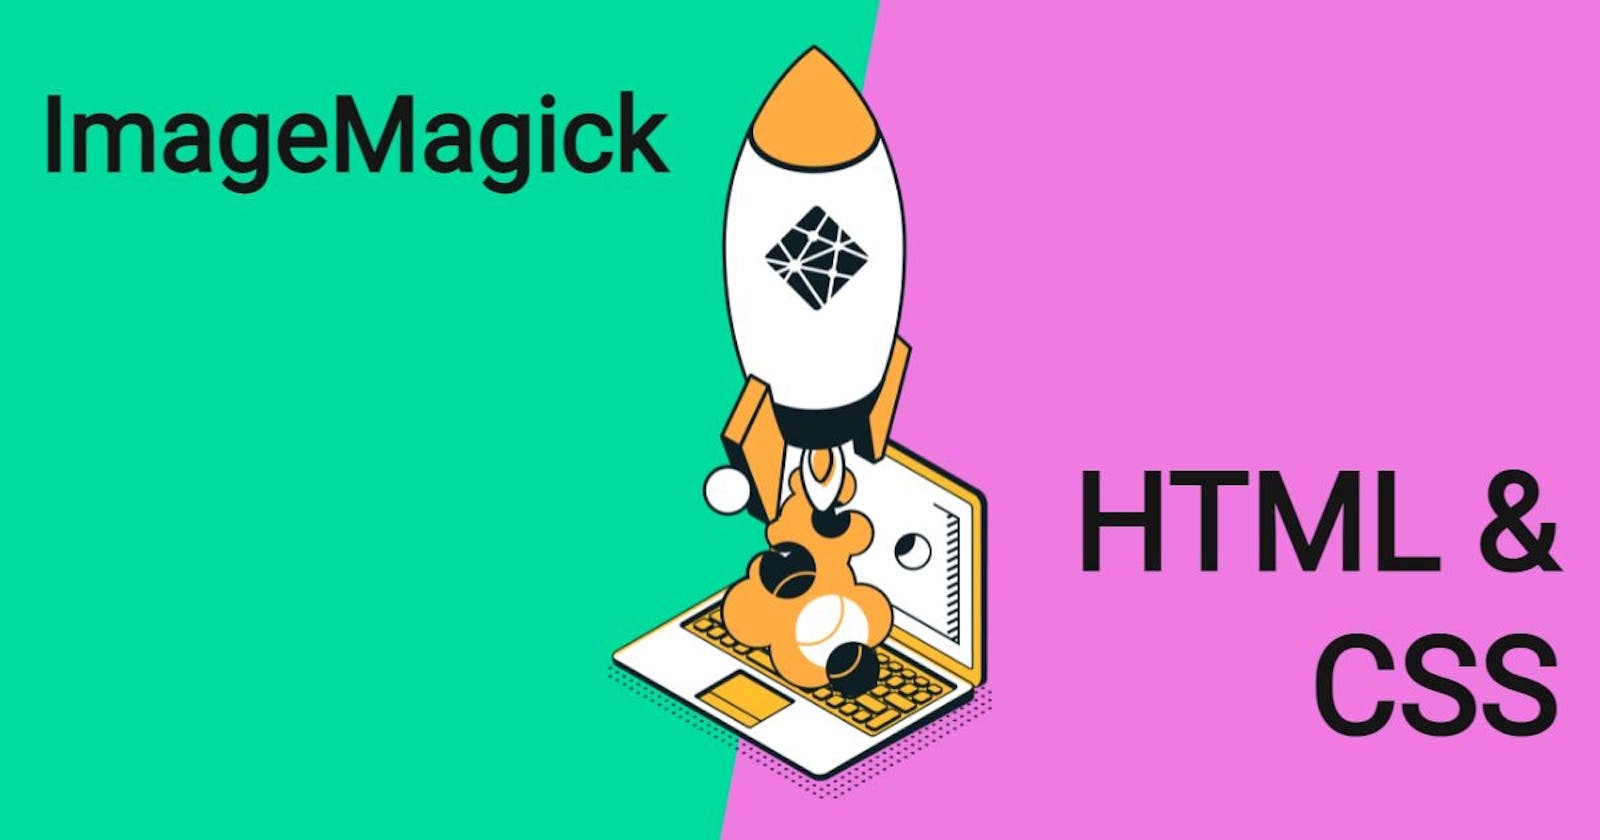 Replace ImageMagick with HTML & CSS